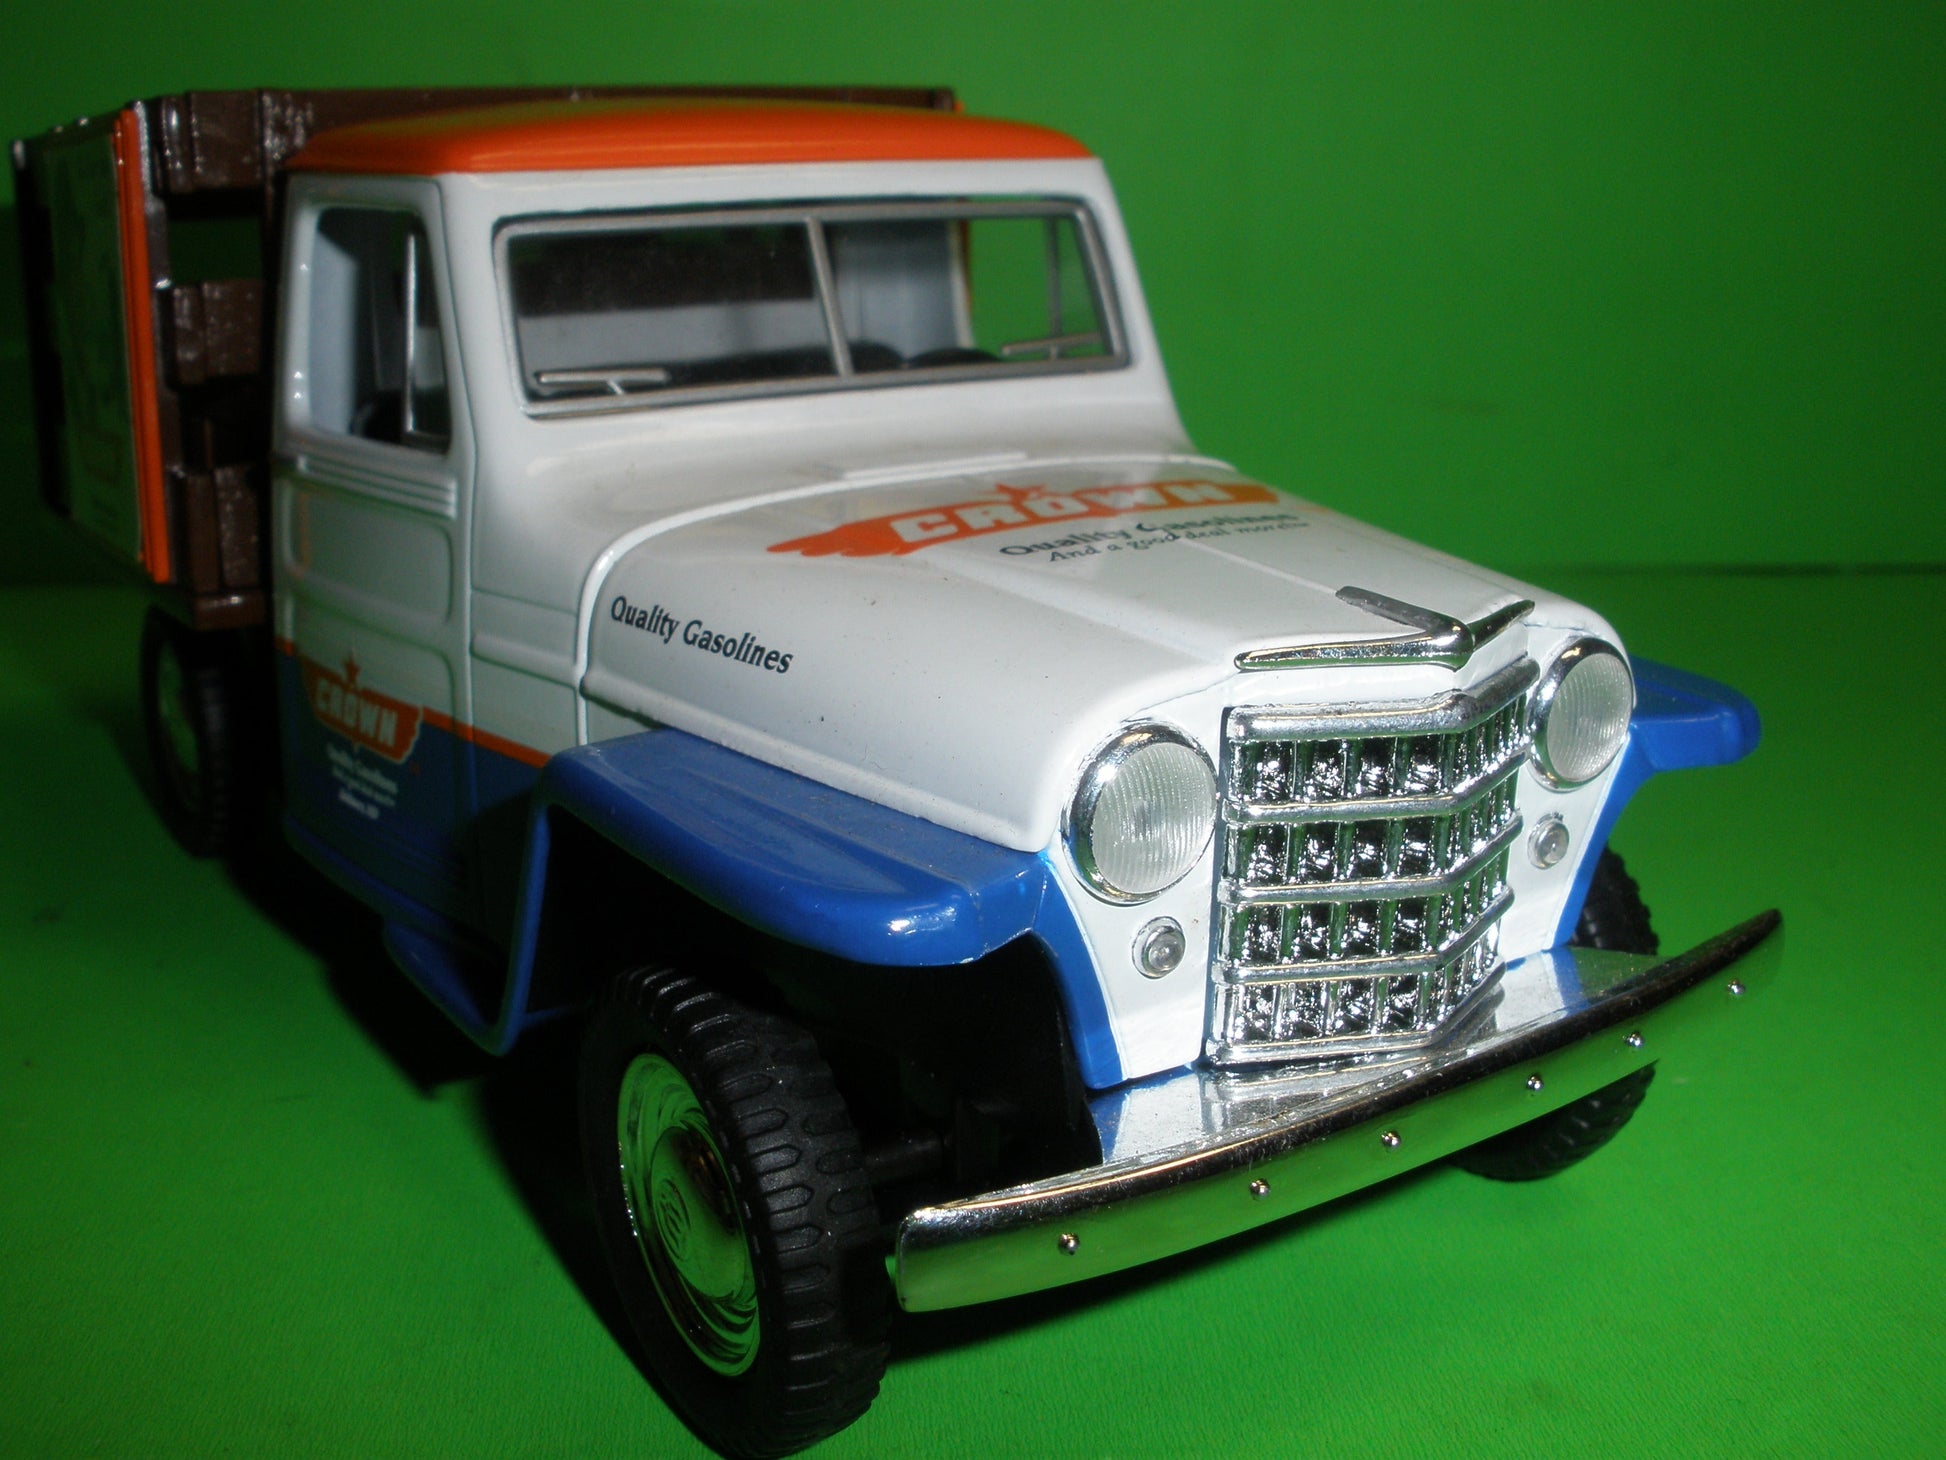 Crown Gasoline 1953 Willys Jeep Stake Bed Truck